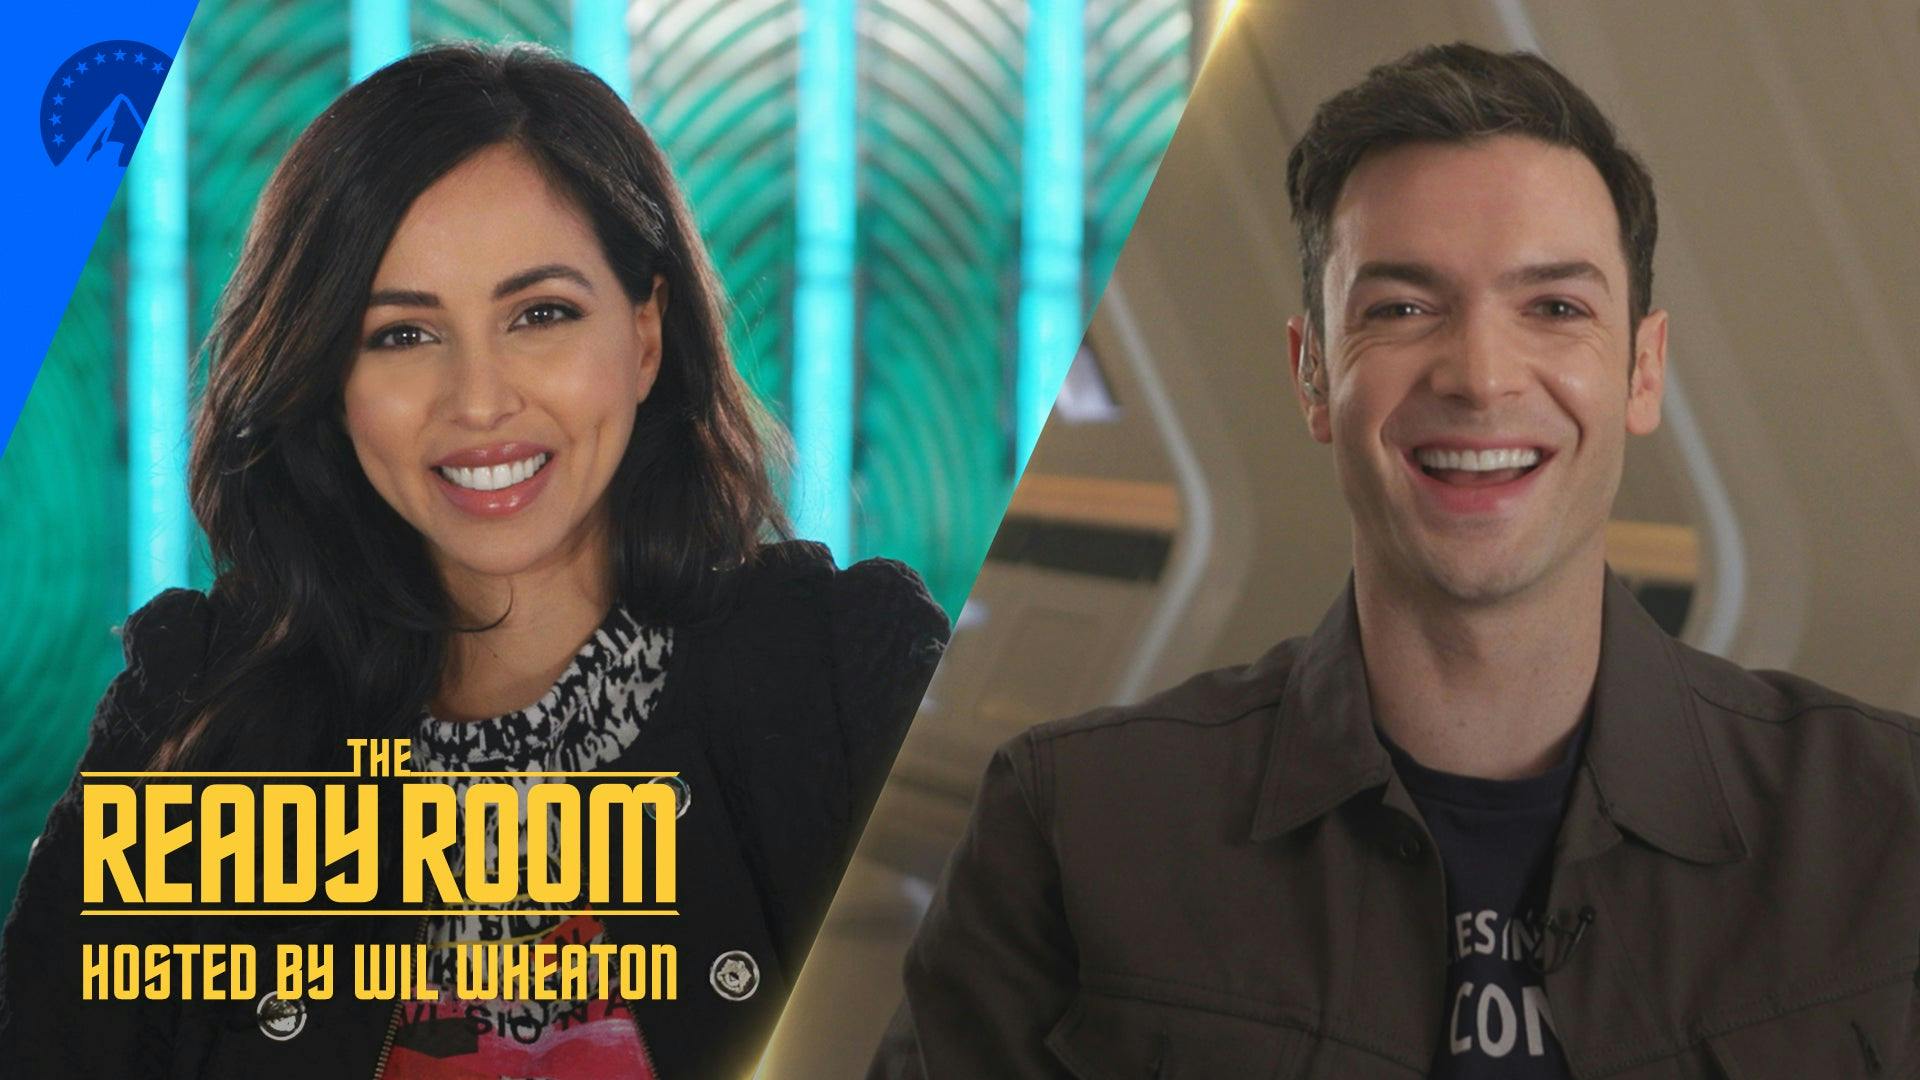 Gia Sandhu and Ethan Peck for The Ready Room 